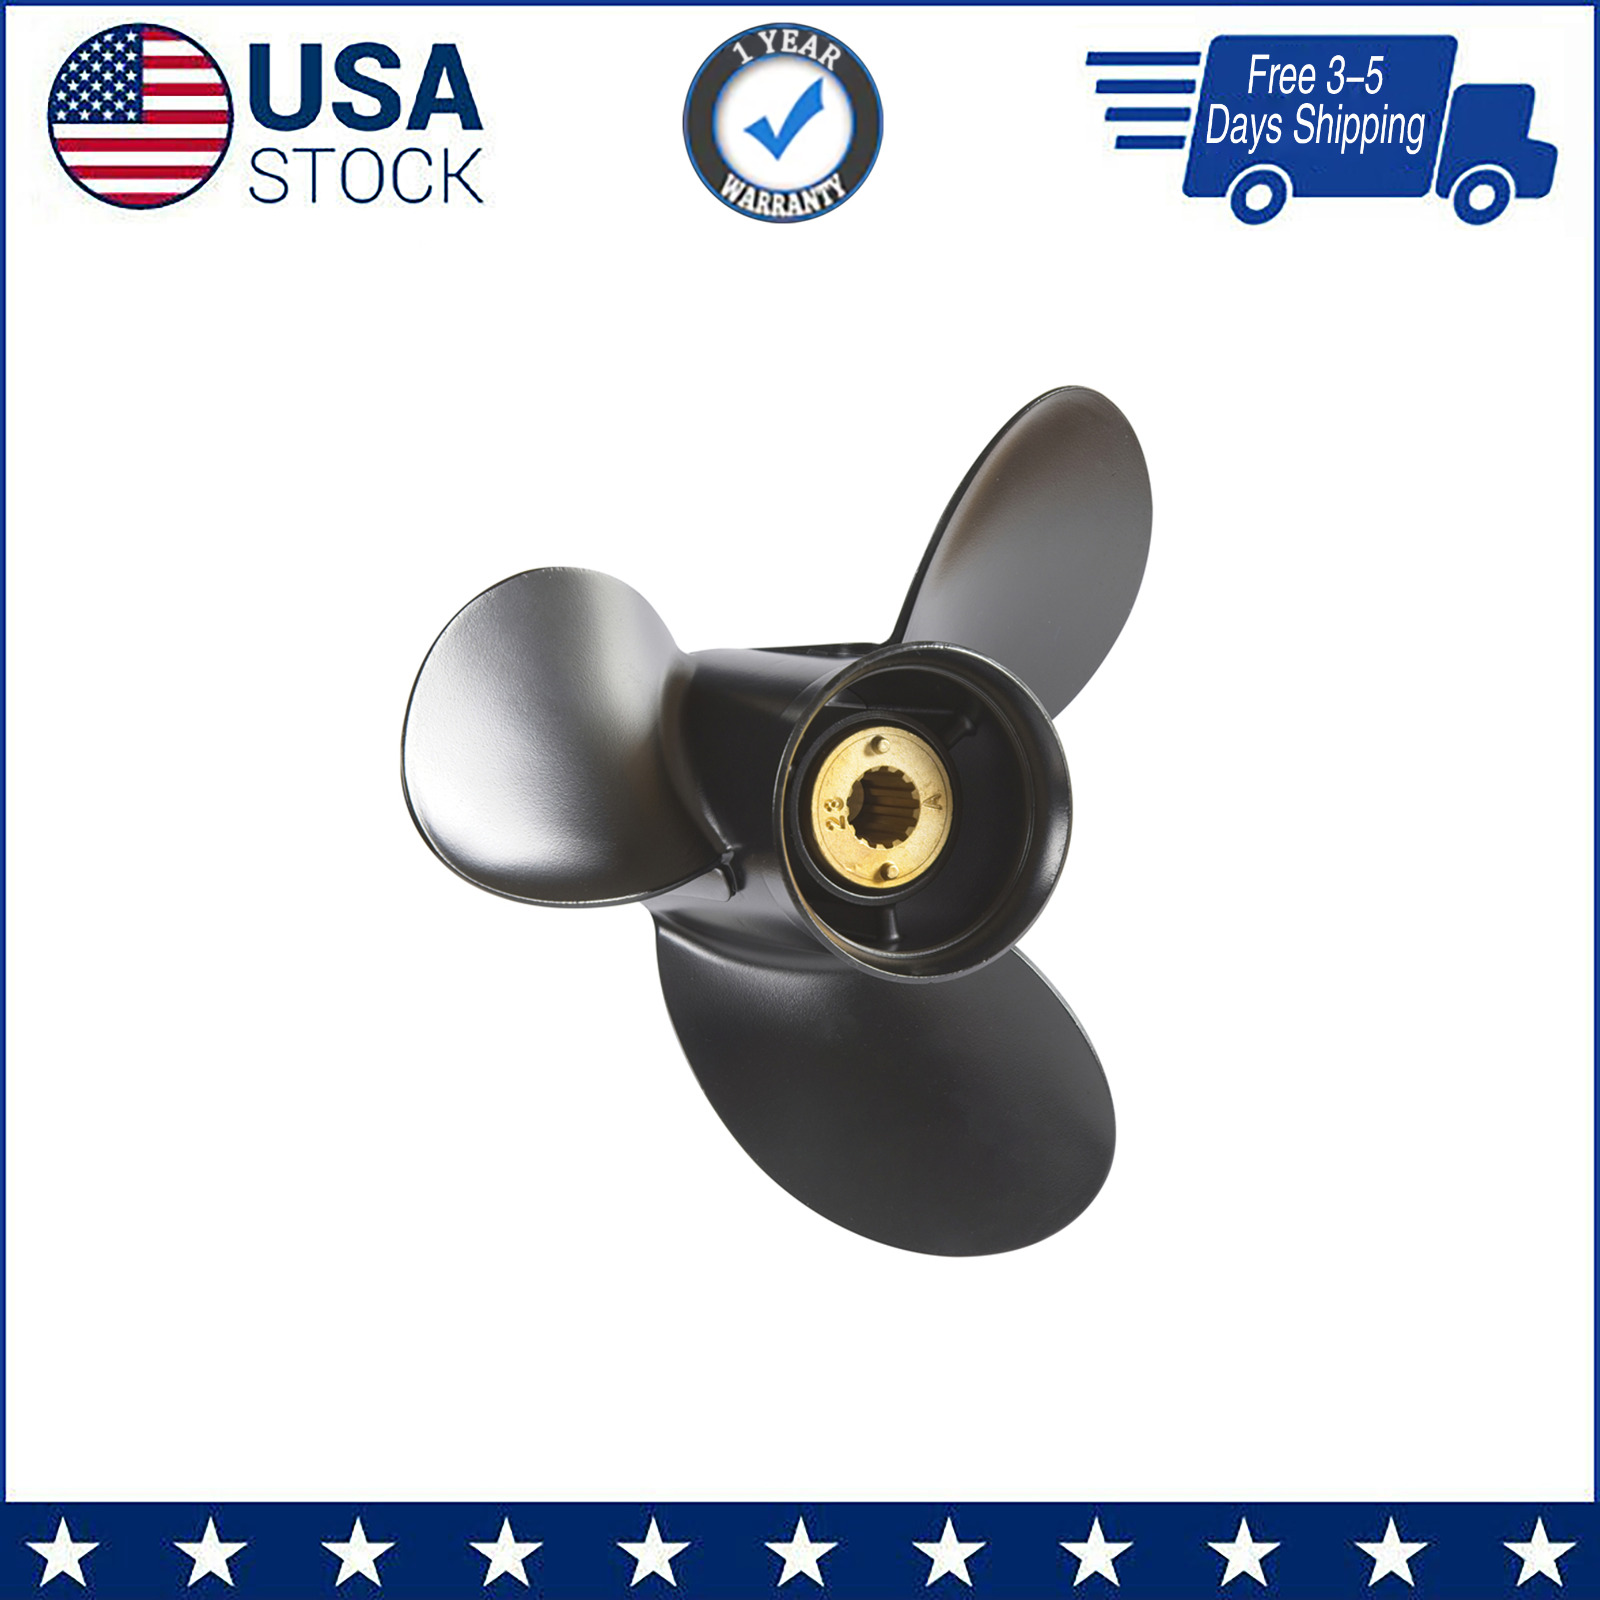 10 1/2 x 13 Aluminum Outboard Propeller fit Mercury Engines 25-70HP,13 Tooth,RH